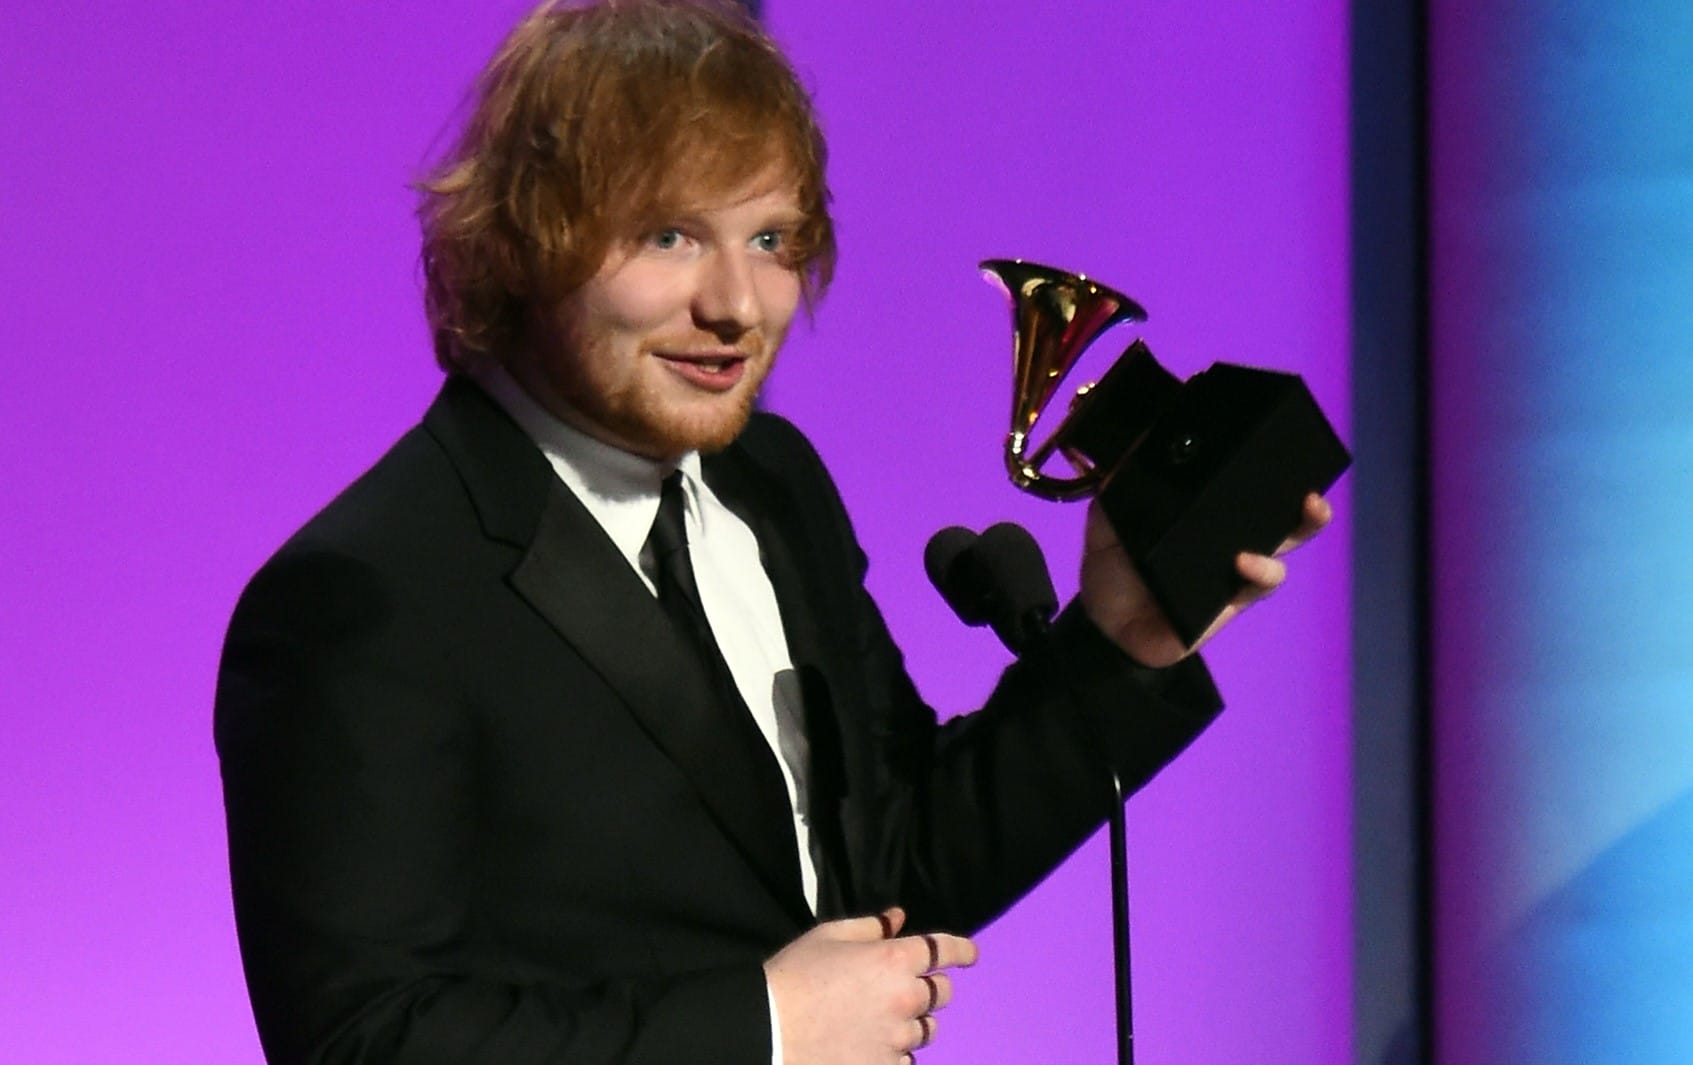 Feb 15, 2016; Los Angeles, CA, USA; Ed Sheeran accepts for Thinking Out Loud in Best Pop Solo Performance during the 58th Grammy Awards at the Staples Center. Mandatory Credit: Robert Hanashiro-USA TODAY NETWORK *** Please Use Credit from Credit Field ***